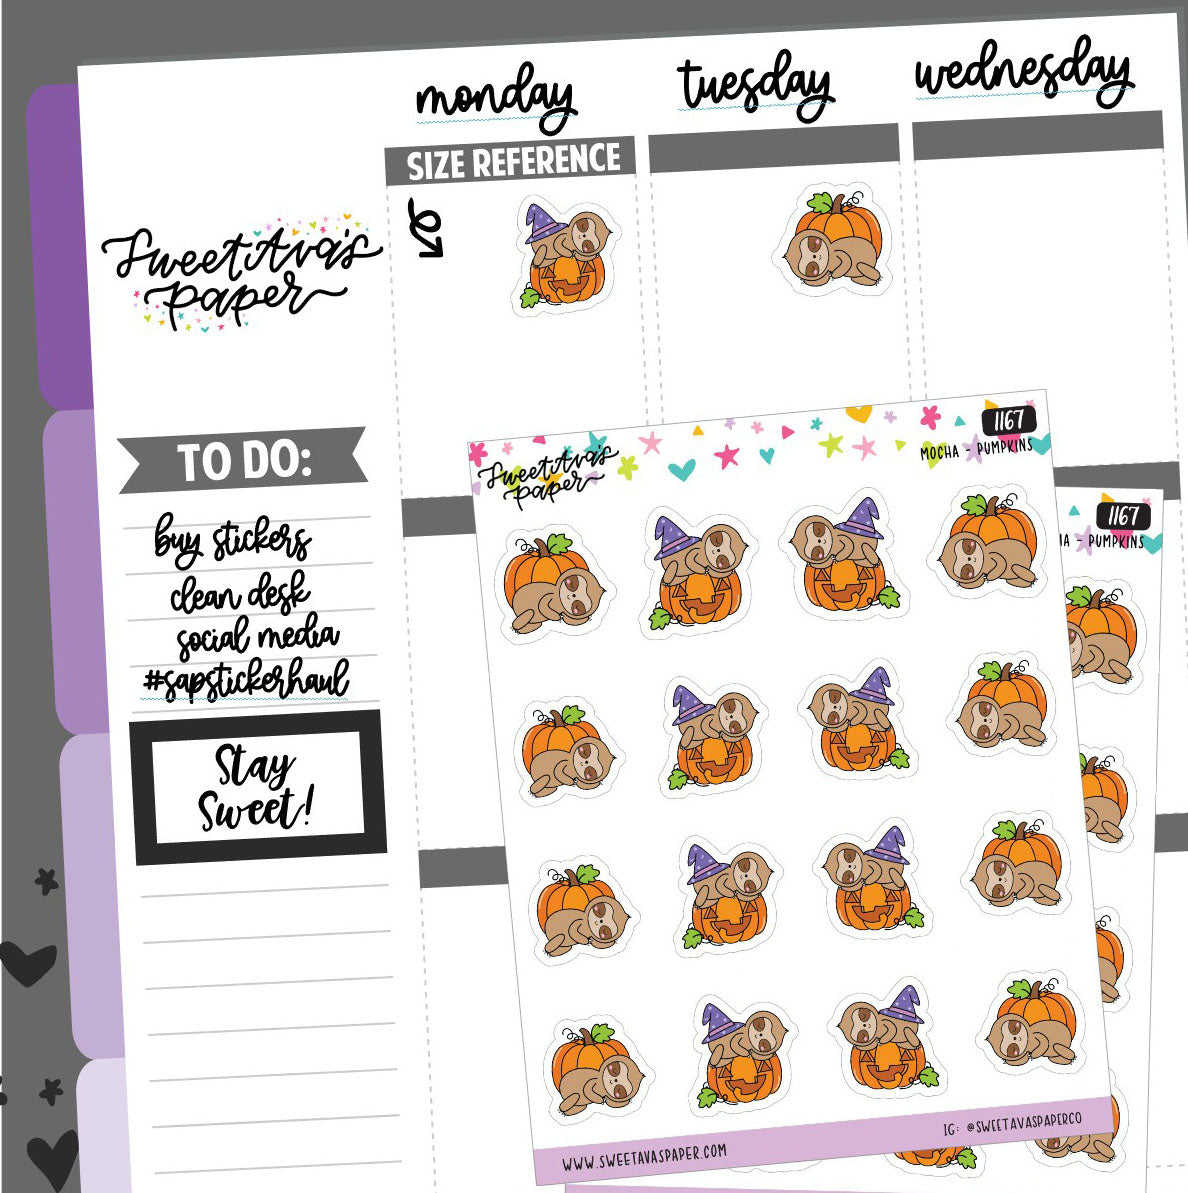 Witchy Pumpkin Planner Stickers - Mocha The Sloth [1167]